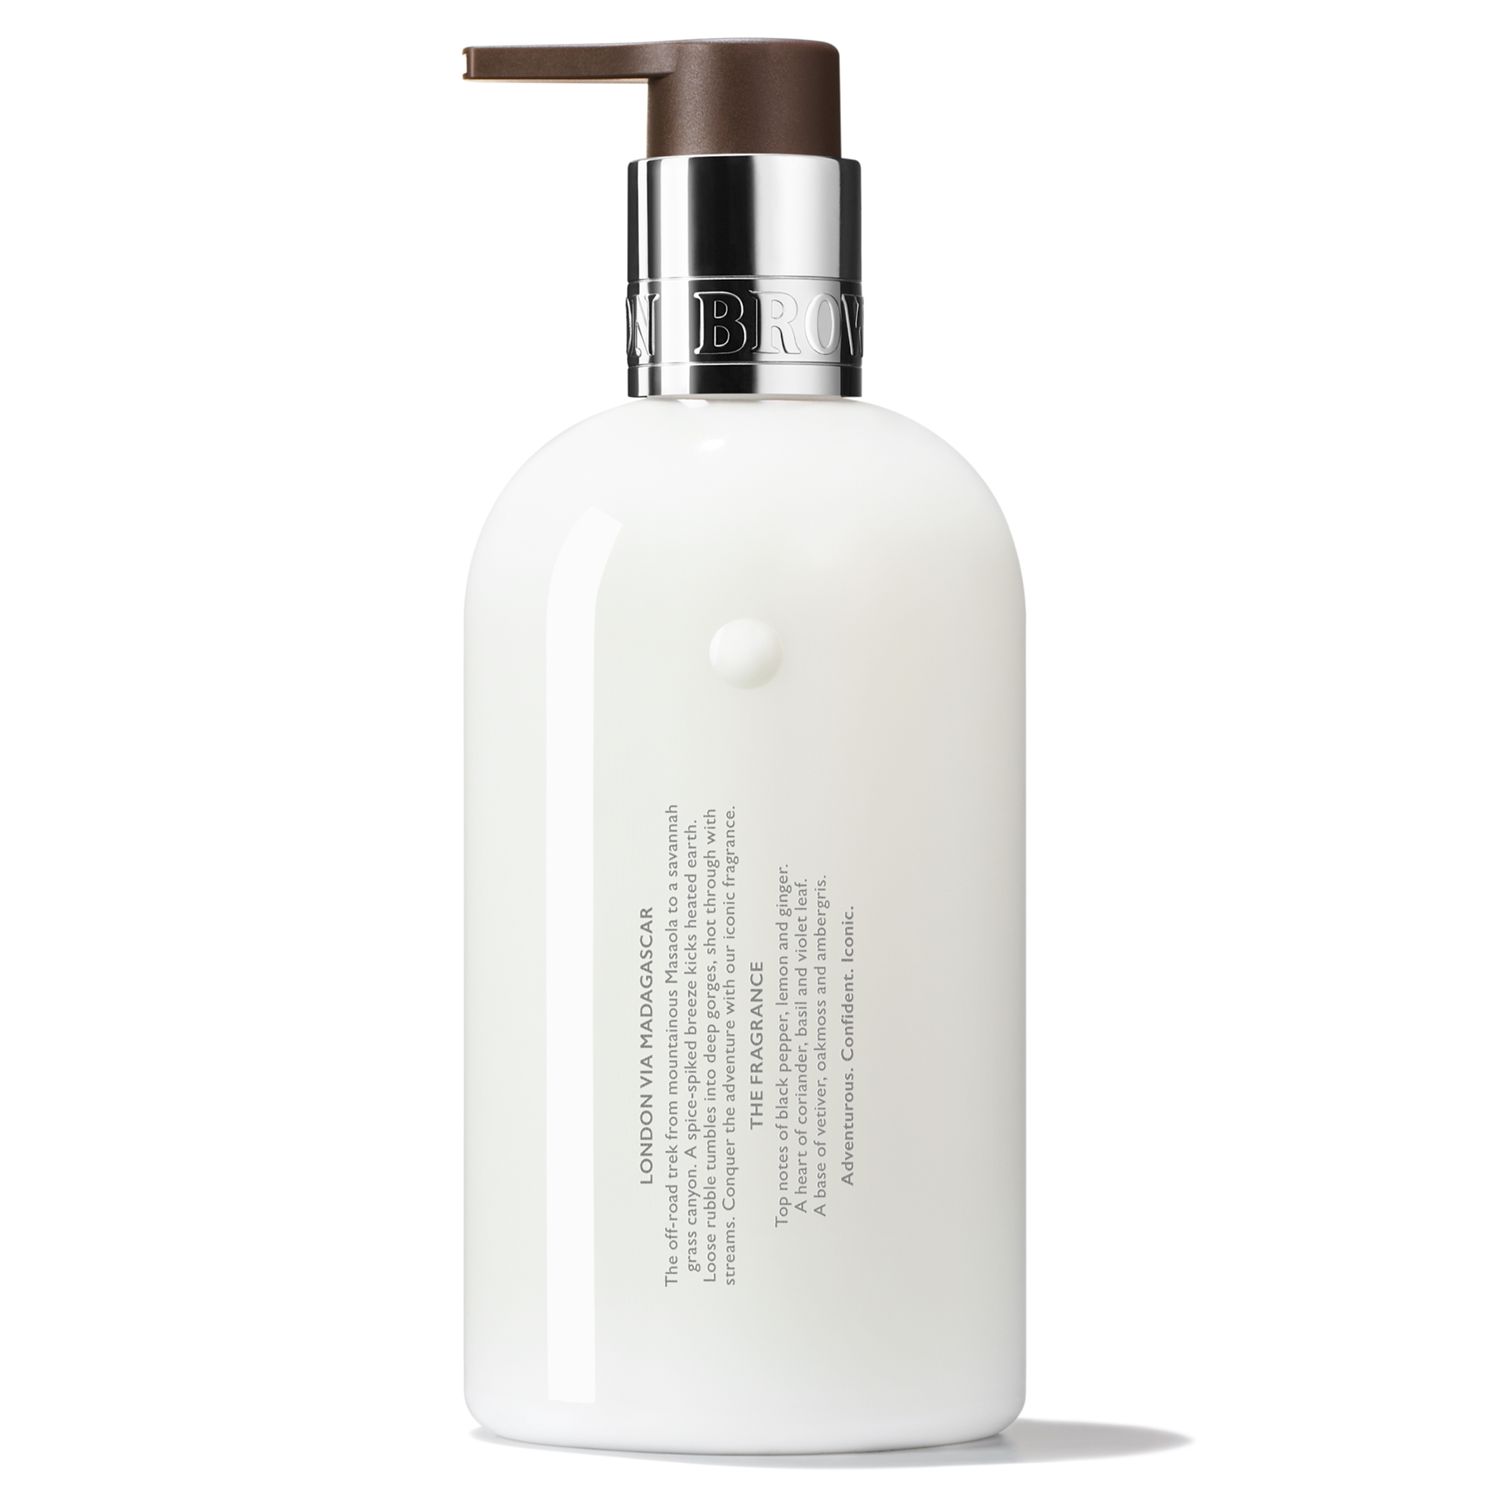 Molton Brown Re-Charge Black Pepper Body Lotion, 300ml 3